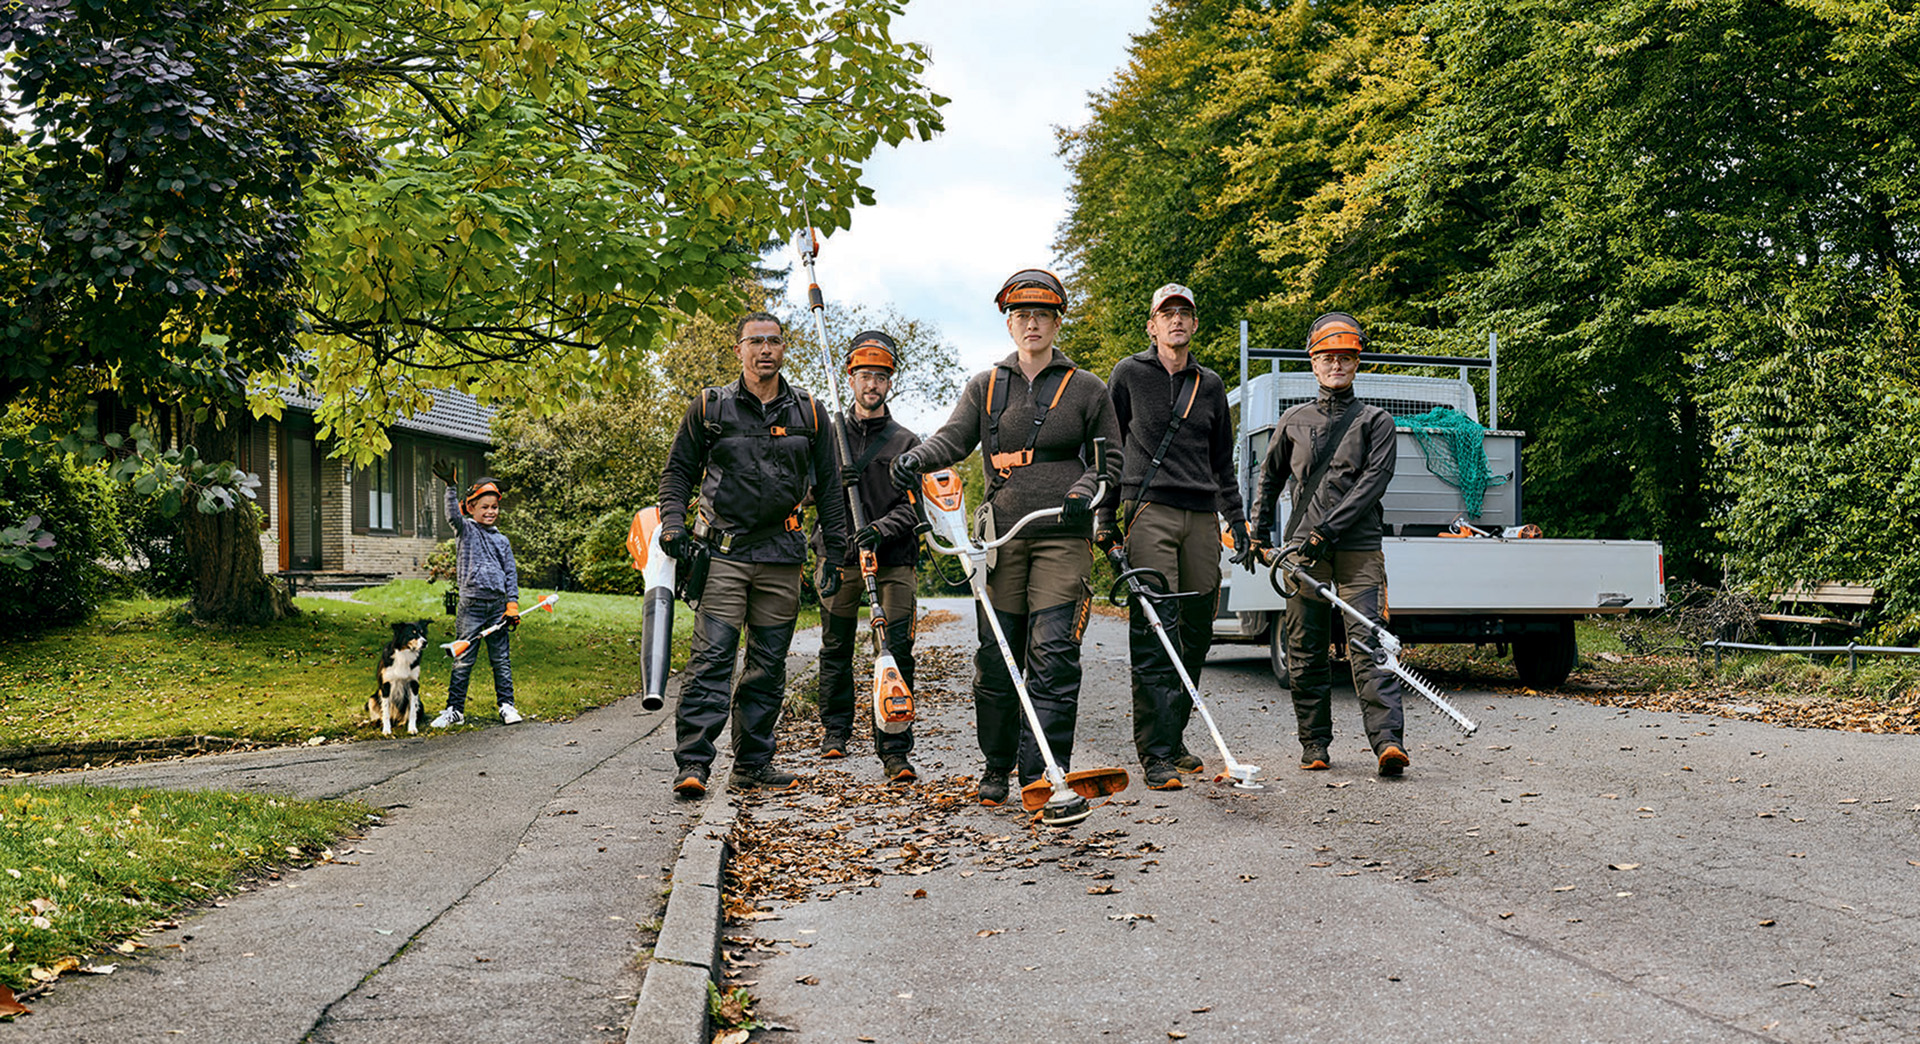 A gardening and landscaping team with STIHL professional cordless power tools walking along a street.